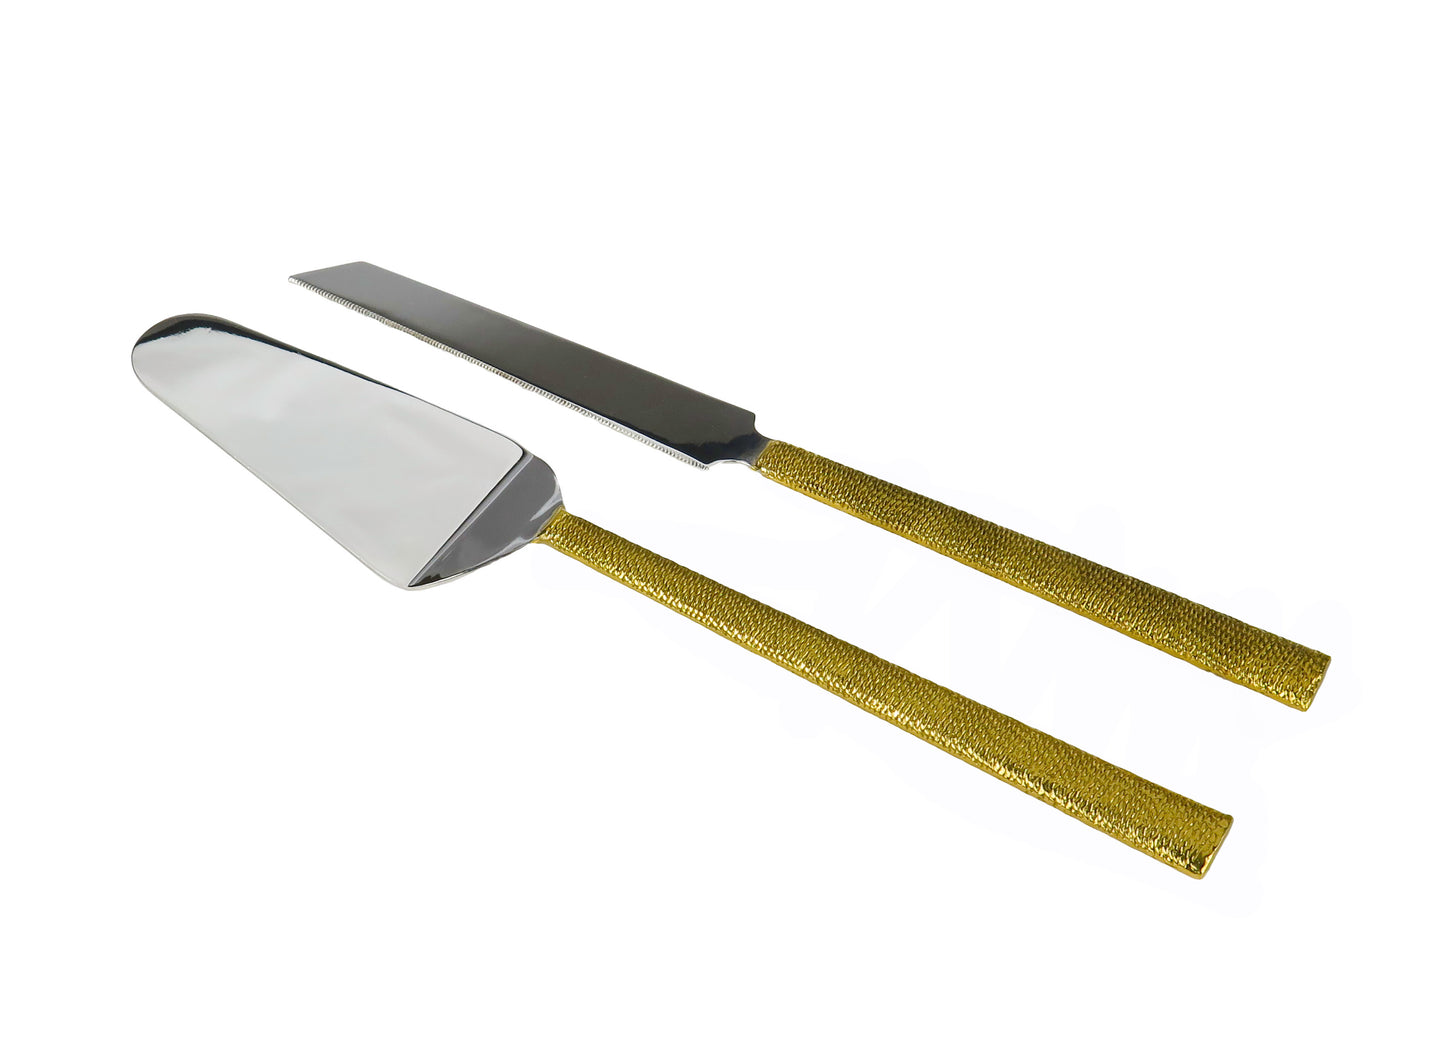 Set of 2 Cake Servers with Gold Handles